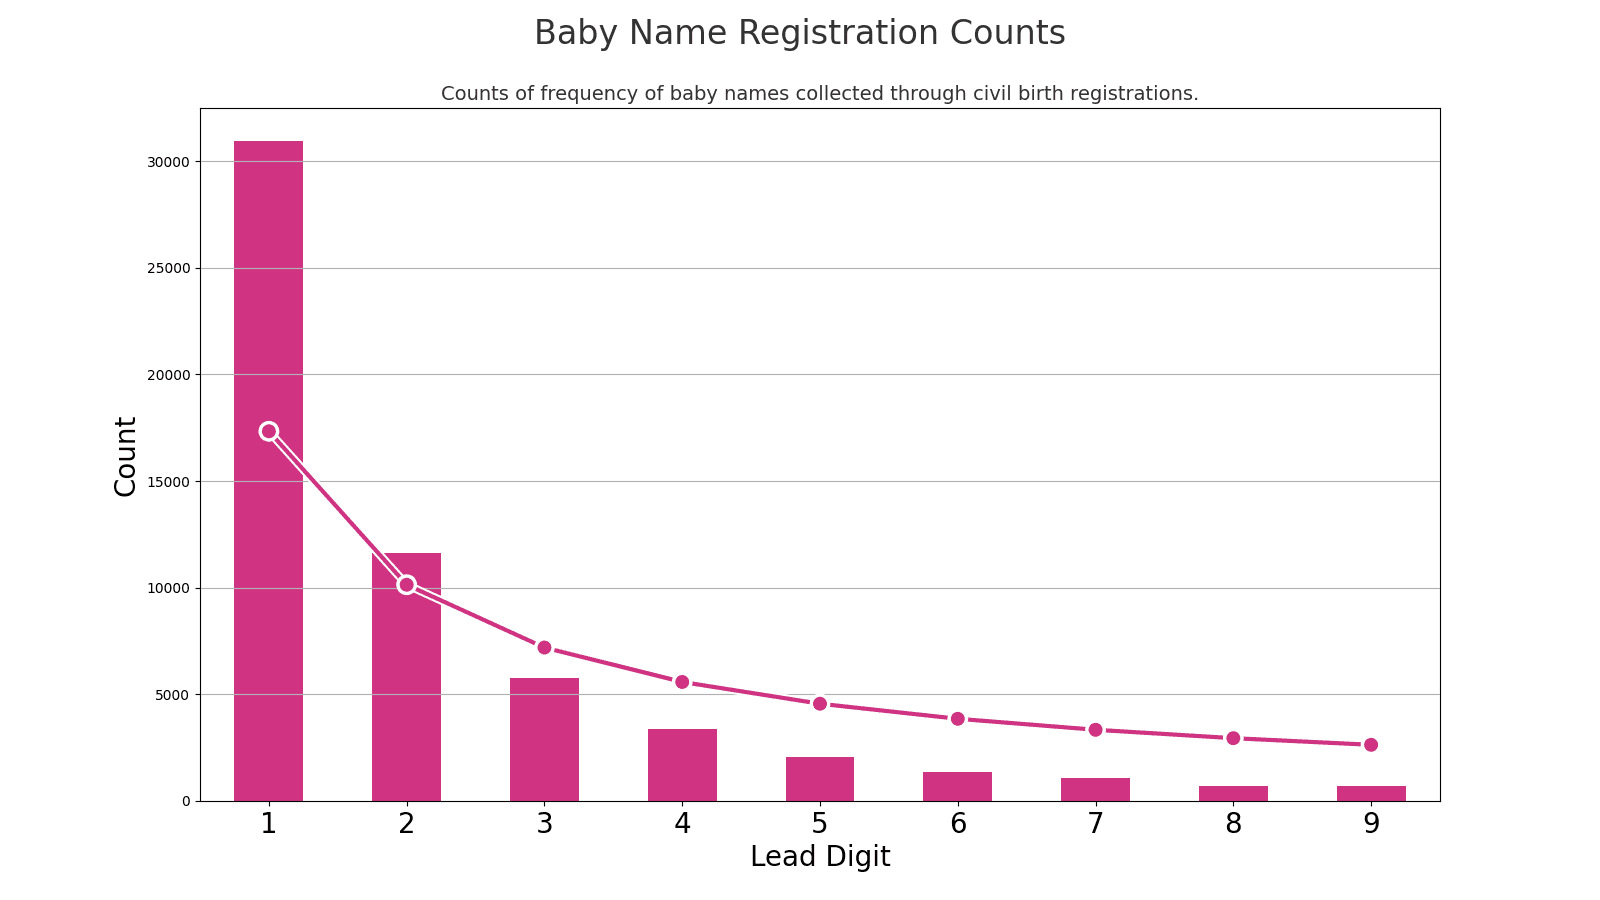 The popularity of different baby names.